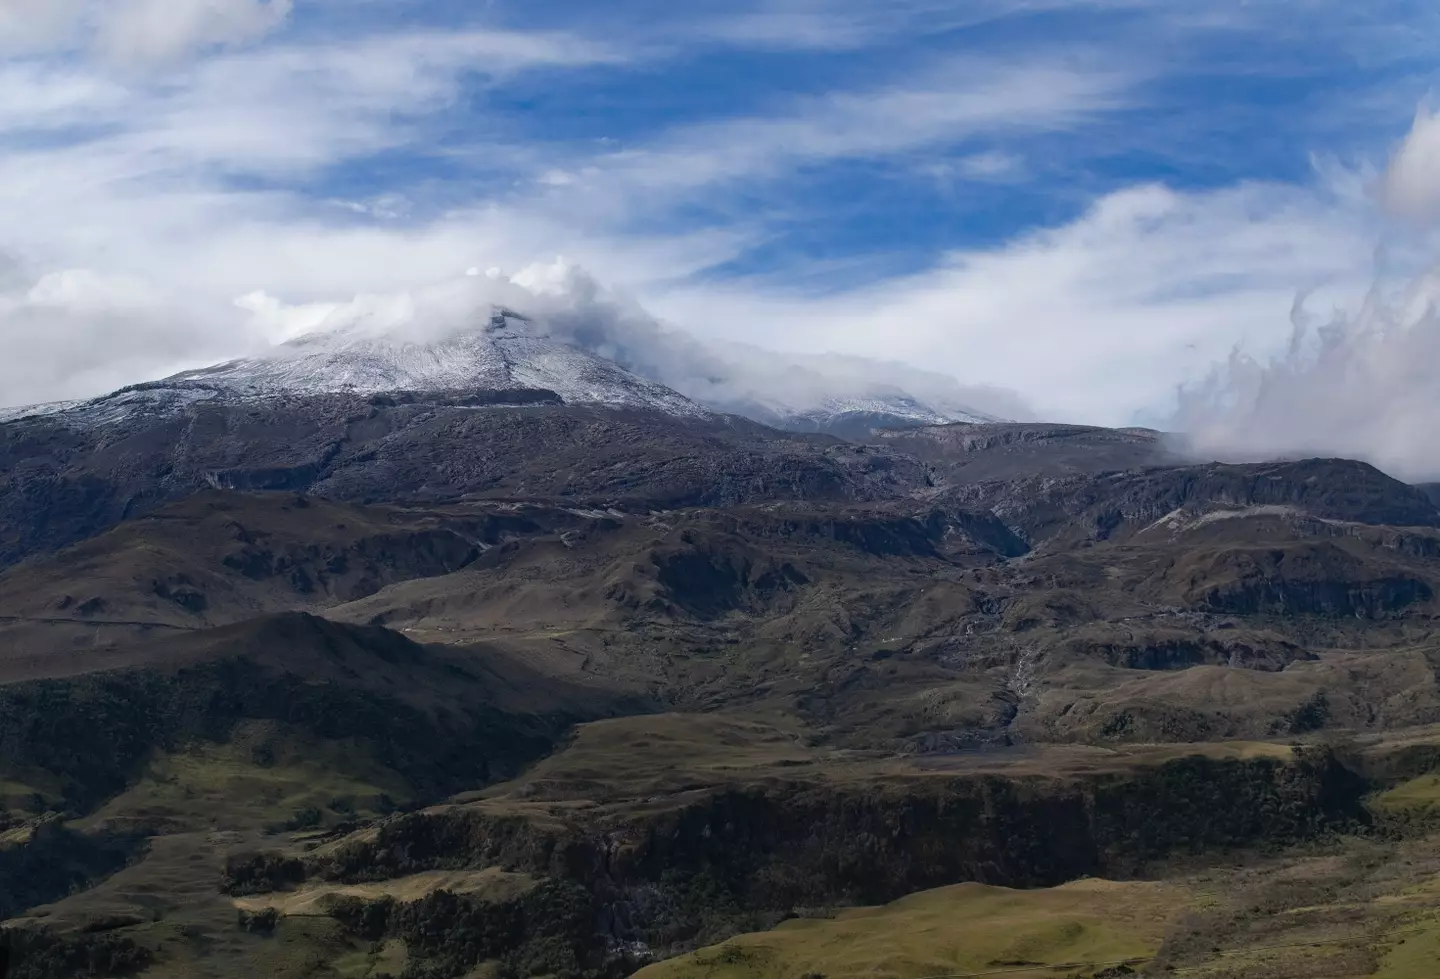 Volcanic lava mixed with ice gushed towards villages after the Nevado del Ruiz volcano erupted.